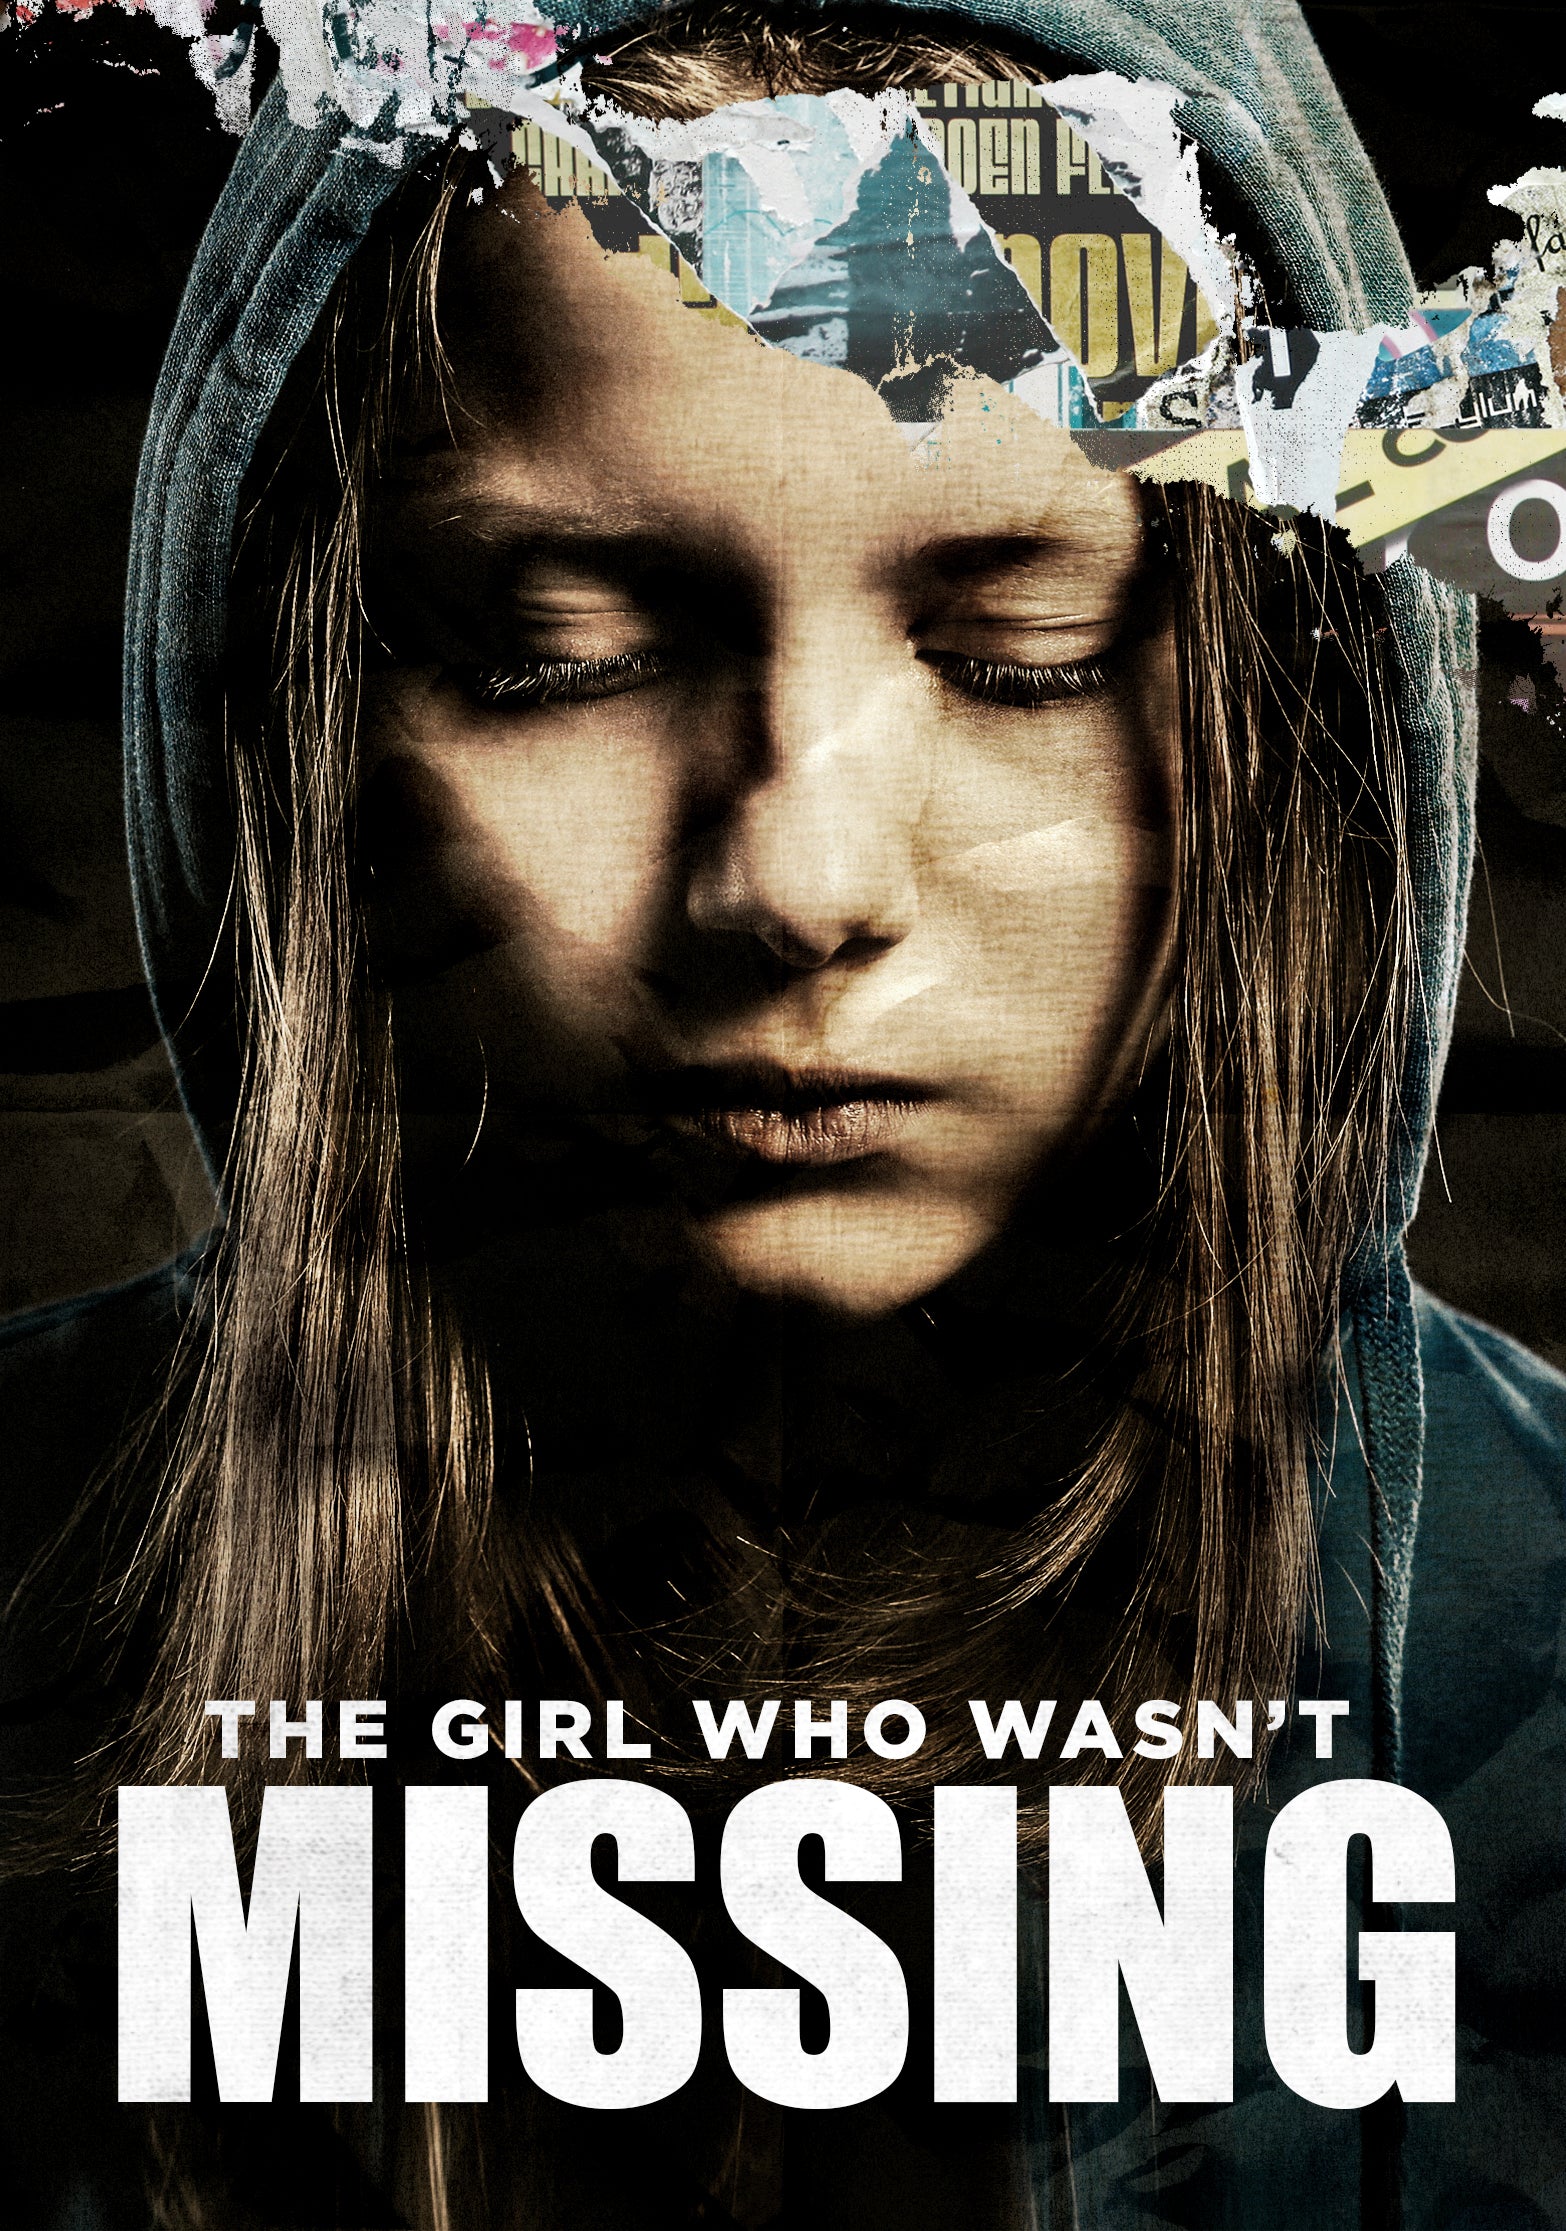 THE GIRL WHO WASN'T MISSING DVD